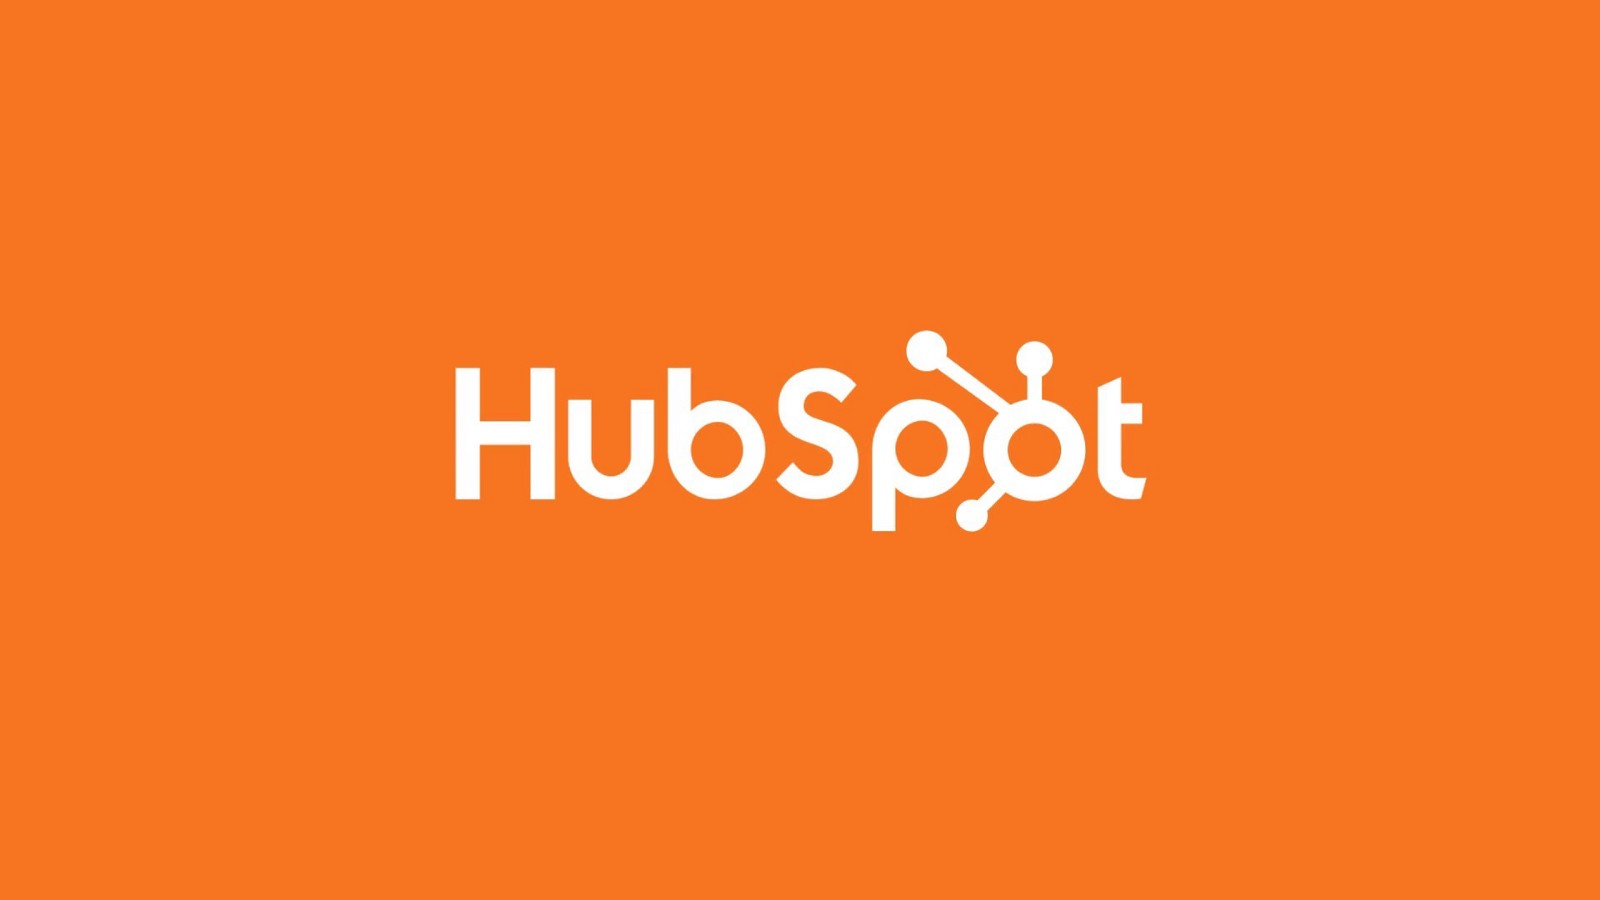 5 Reasons To Use Hubspot As Your Marketing Platform - StepUp